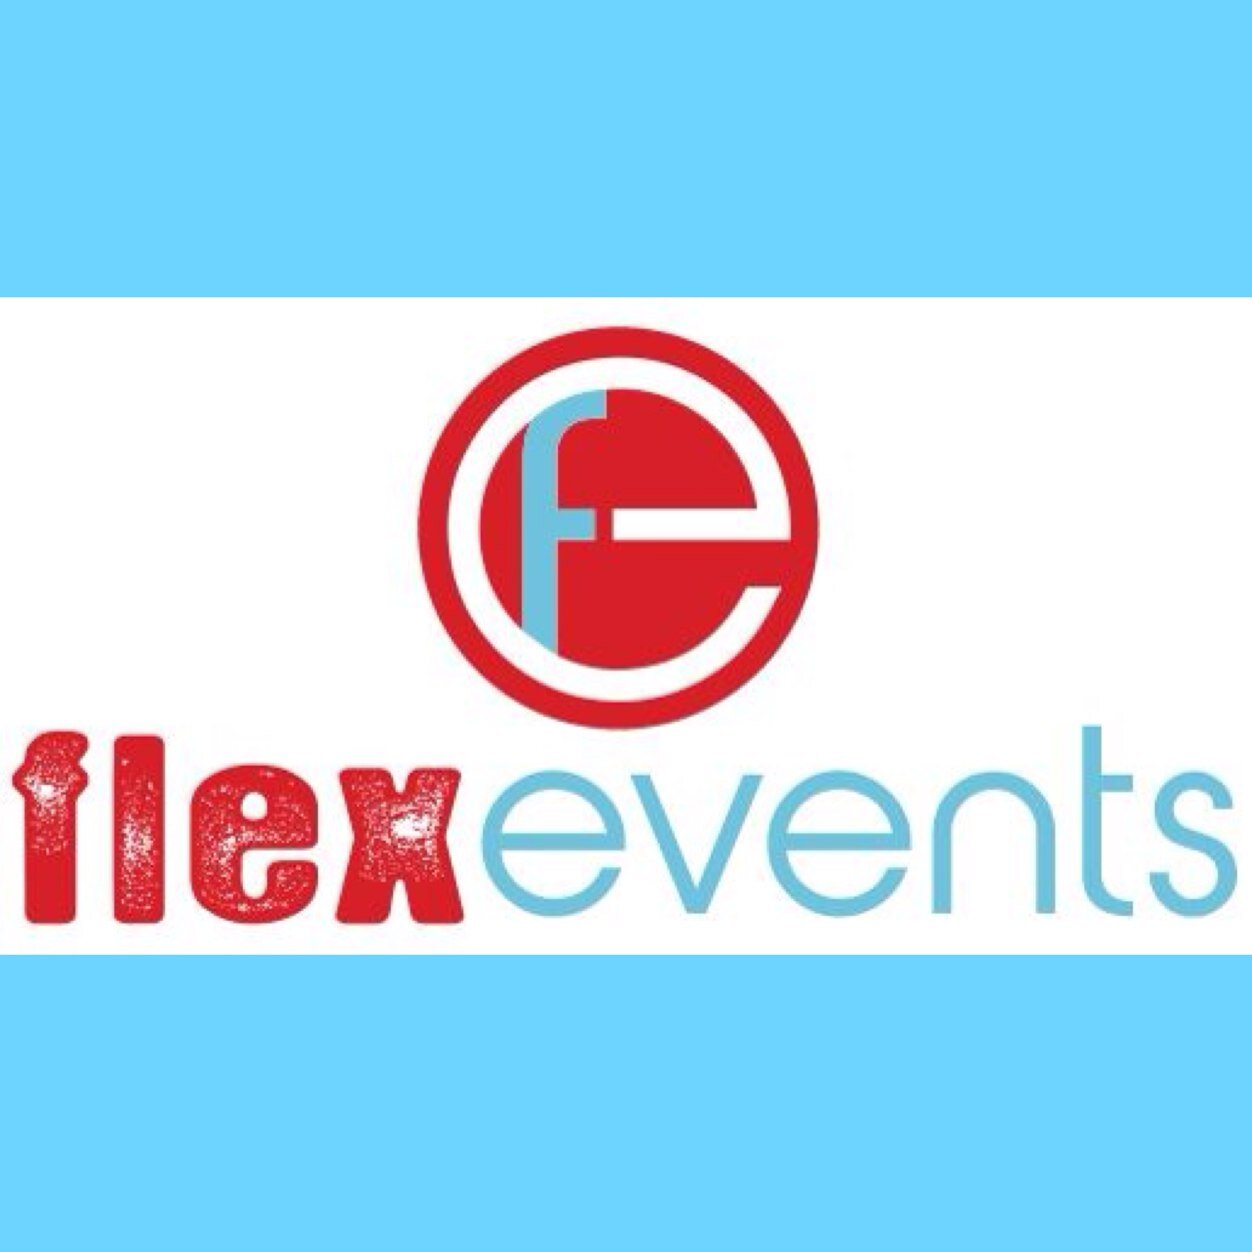 Flex HQ is a competition event company.. Come get your Flex on